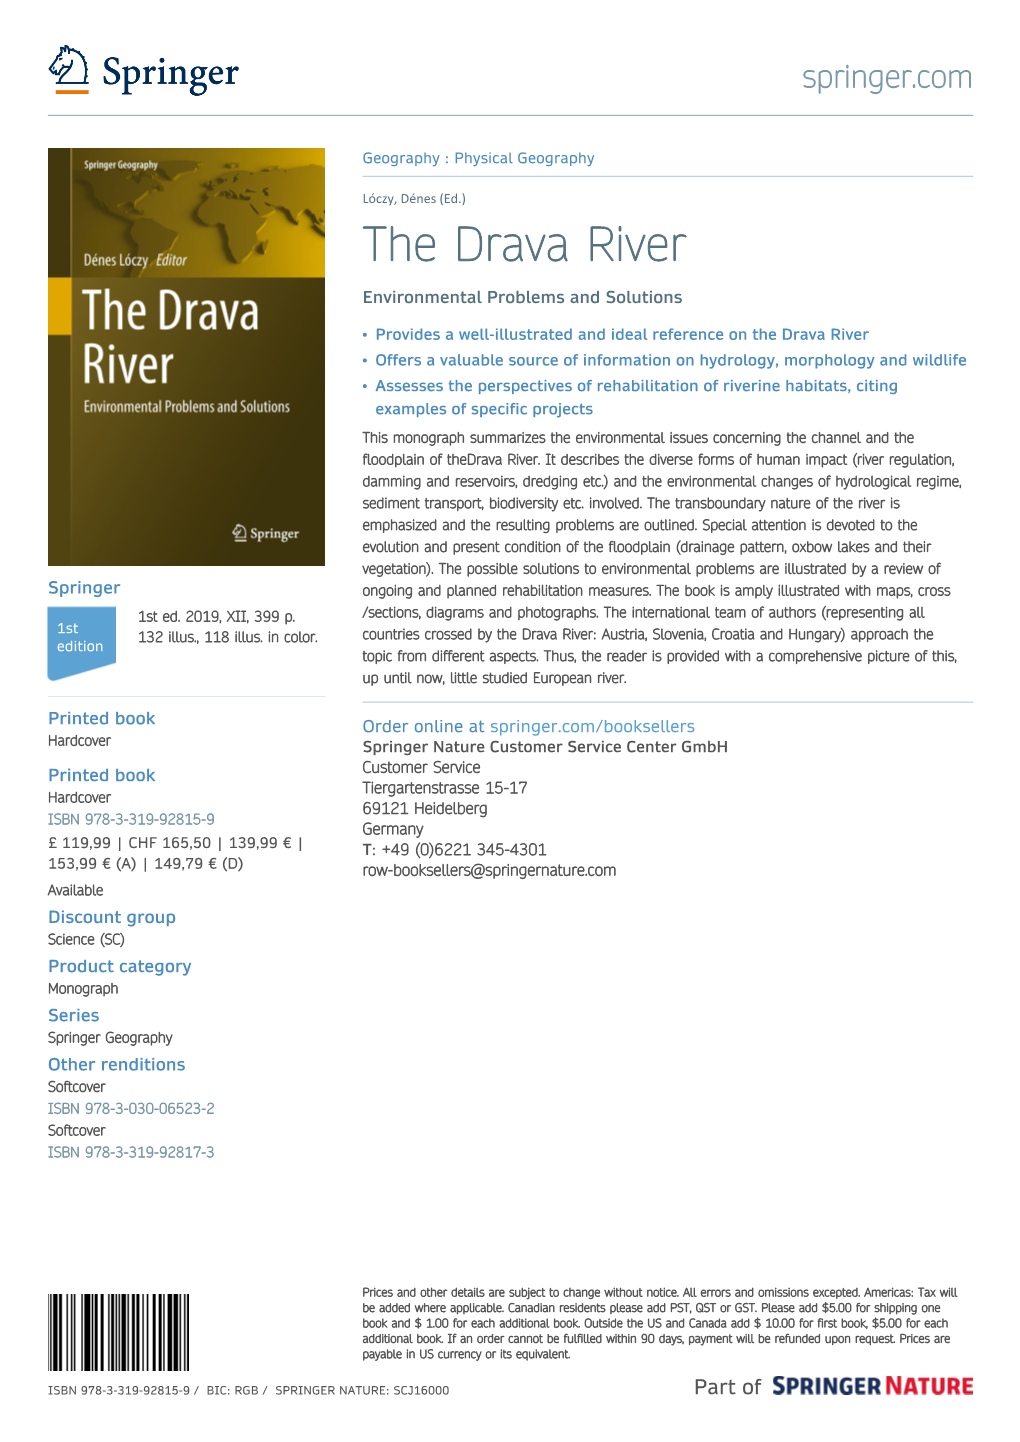 The Drava River Environmental Problems and Solutions